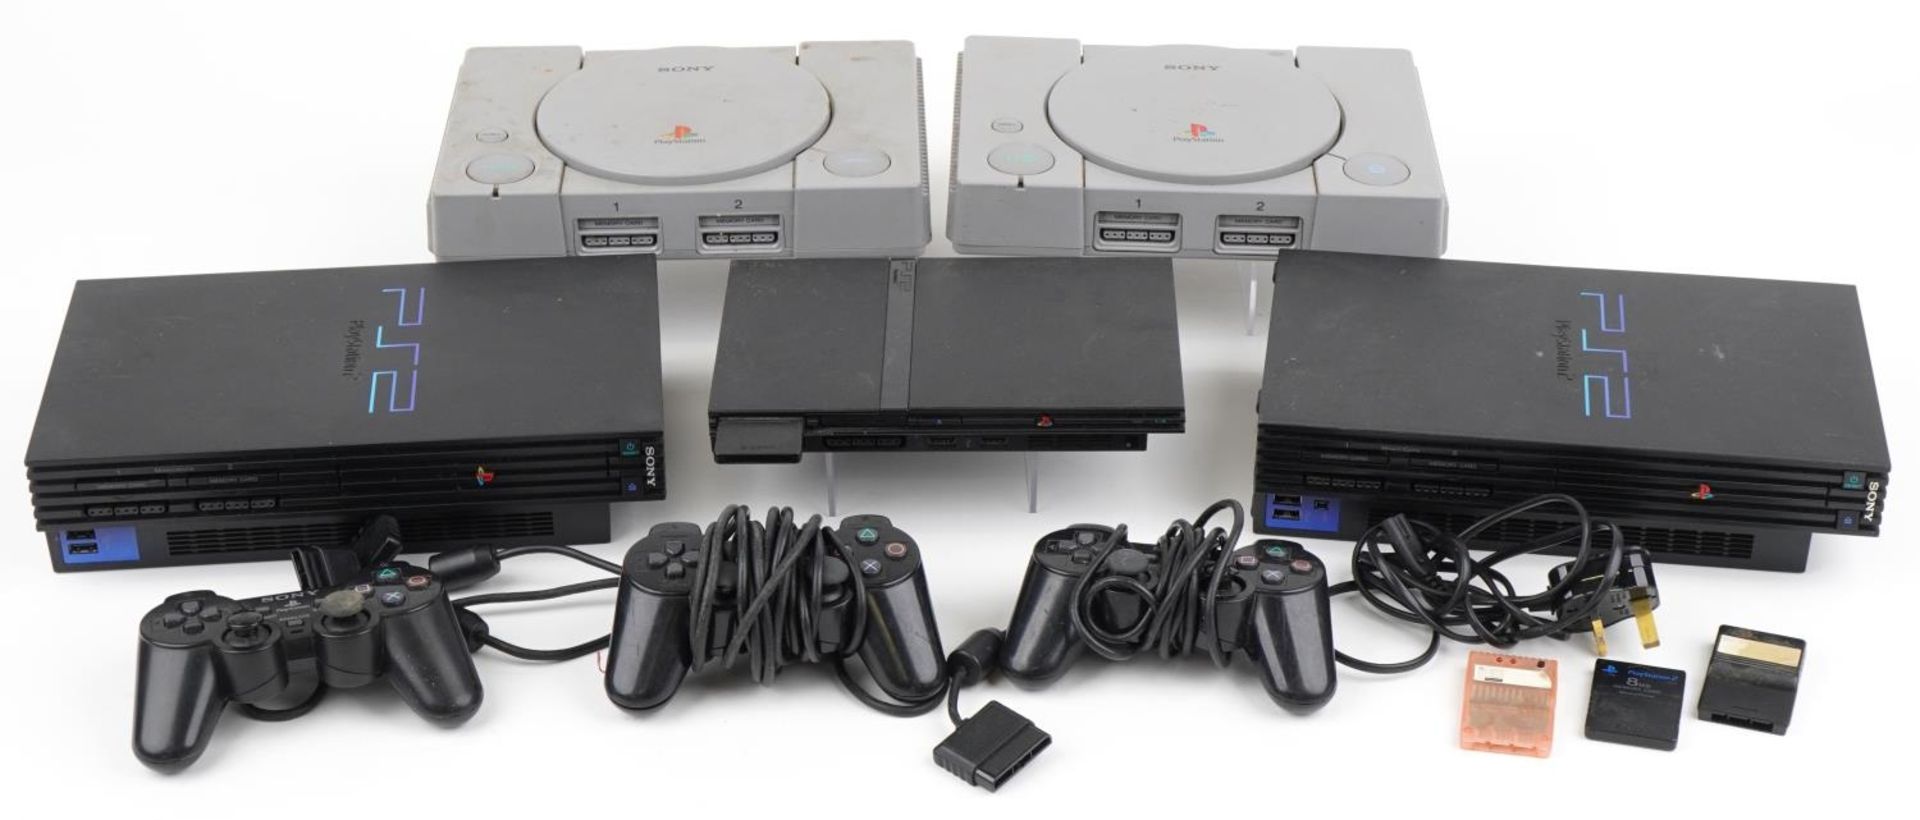 Five Sony games consoles with three controllers including two PlayStation 1s and three PlayStation